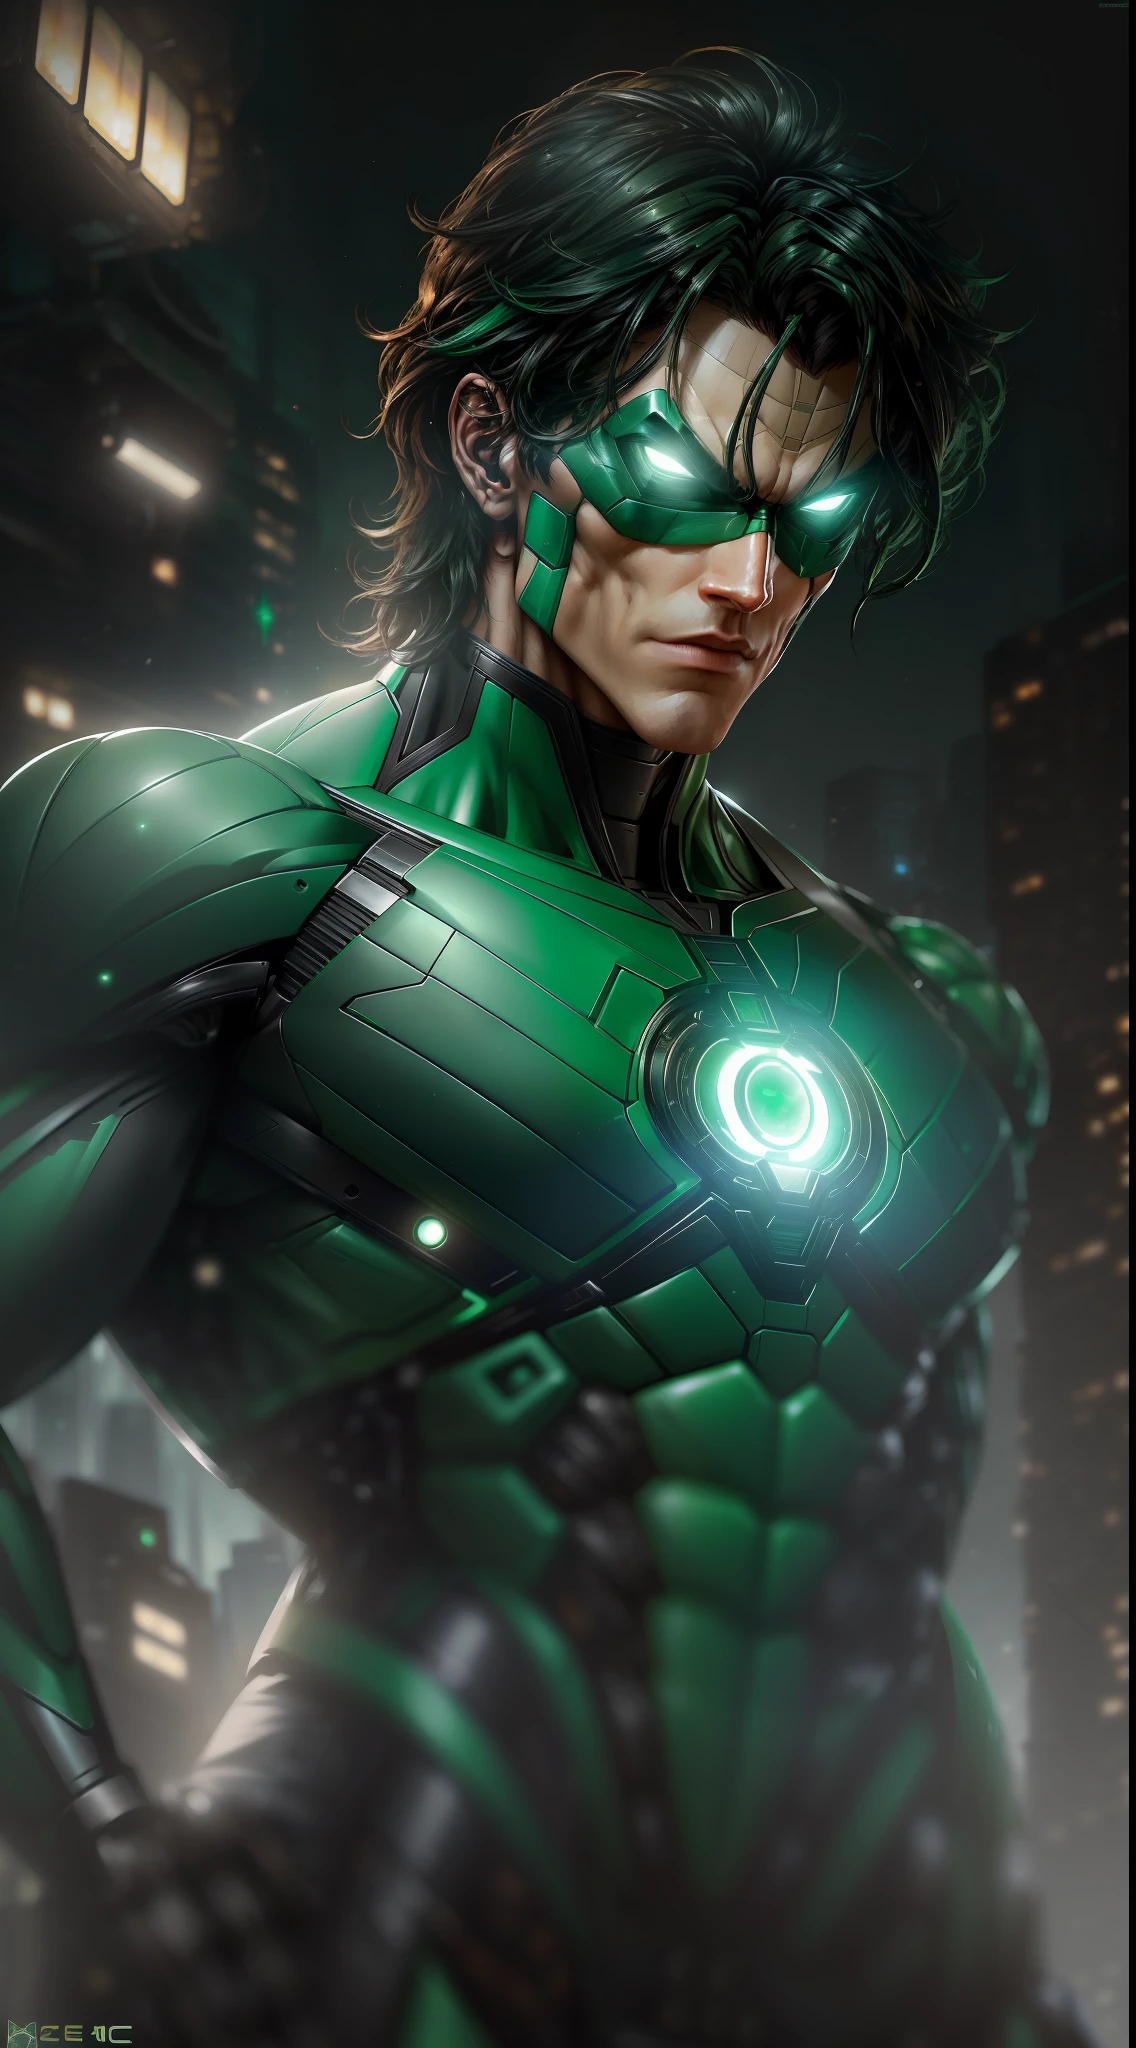 Nightwing Green Lantern from DC photography, biomechanical, complex robot, full growth, hyper-realistic, insane fine details, extremely clean lines, cyberpunk aesthetic, a masterpiece featured at Zbrush Central